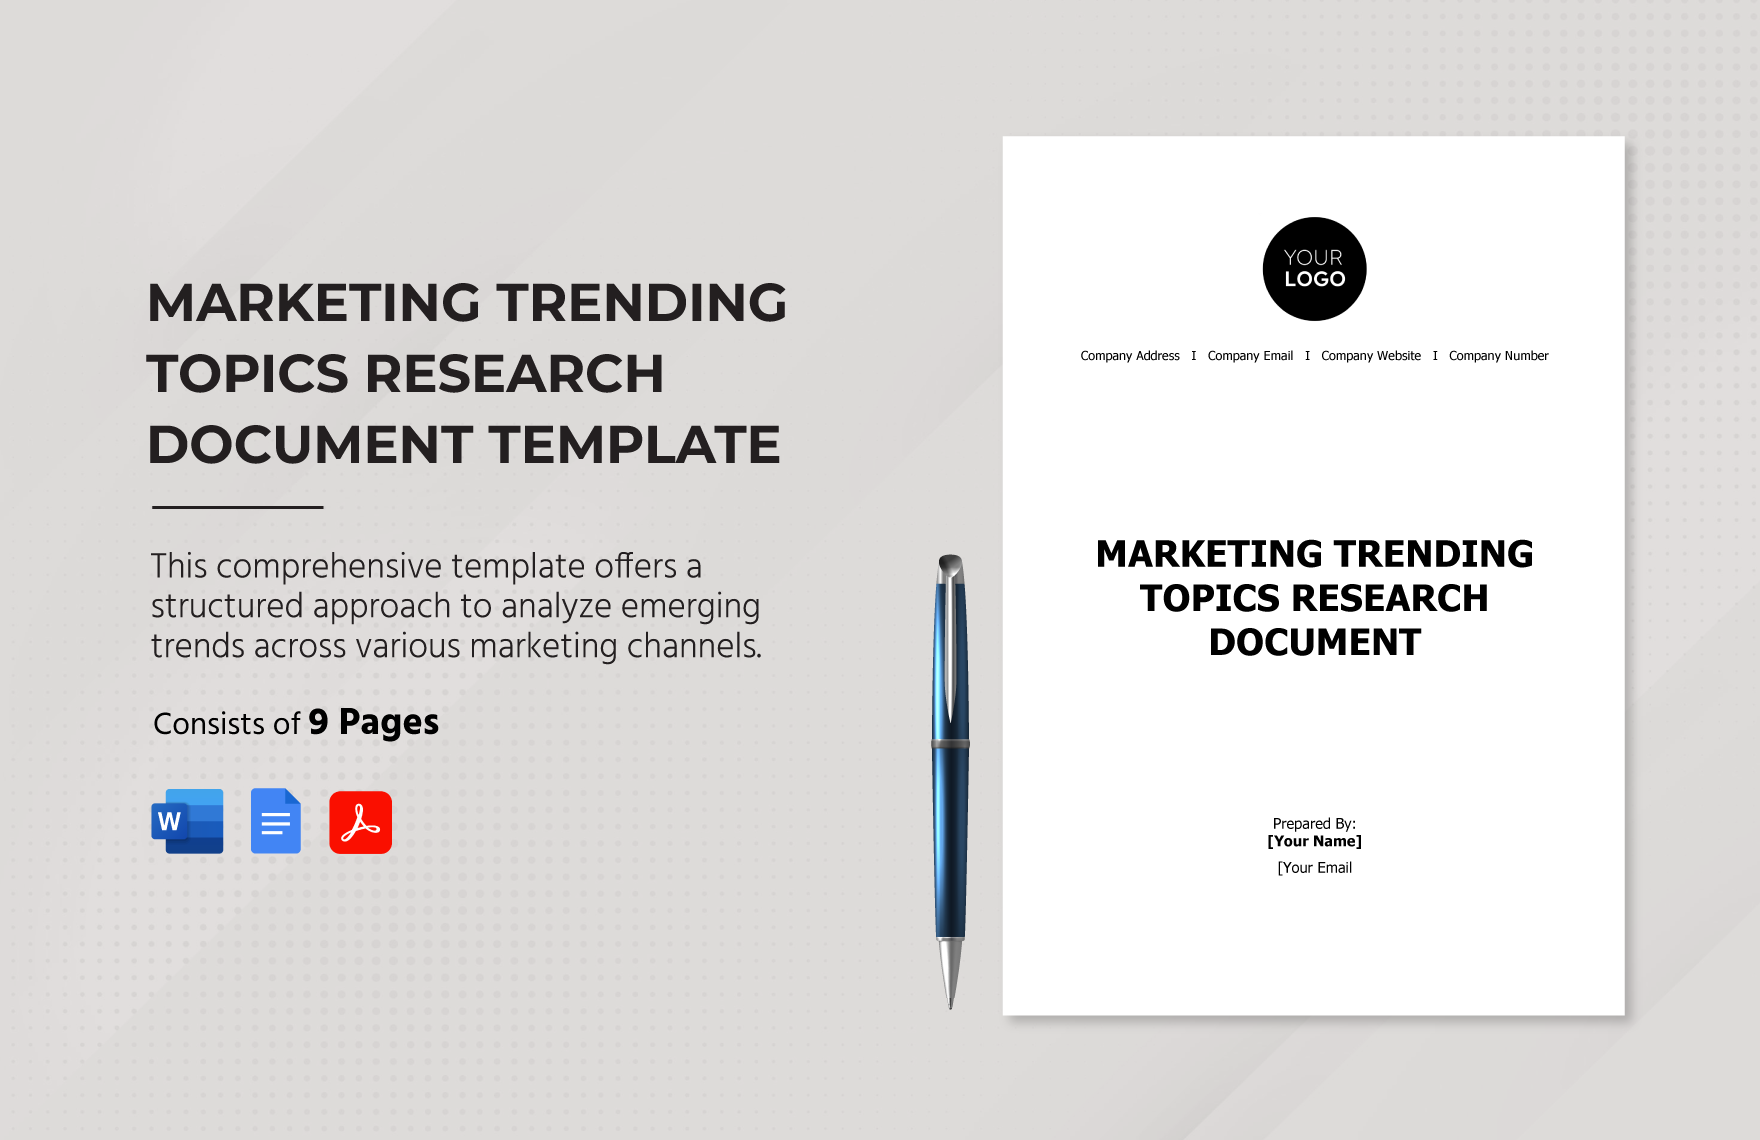 Marketing Trending Topics Research Document Template